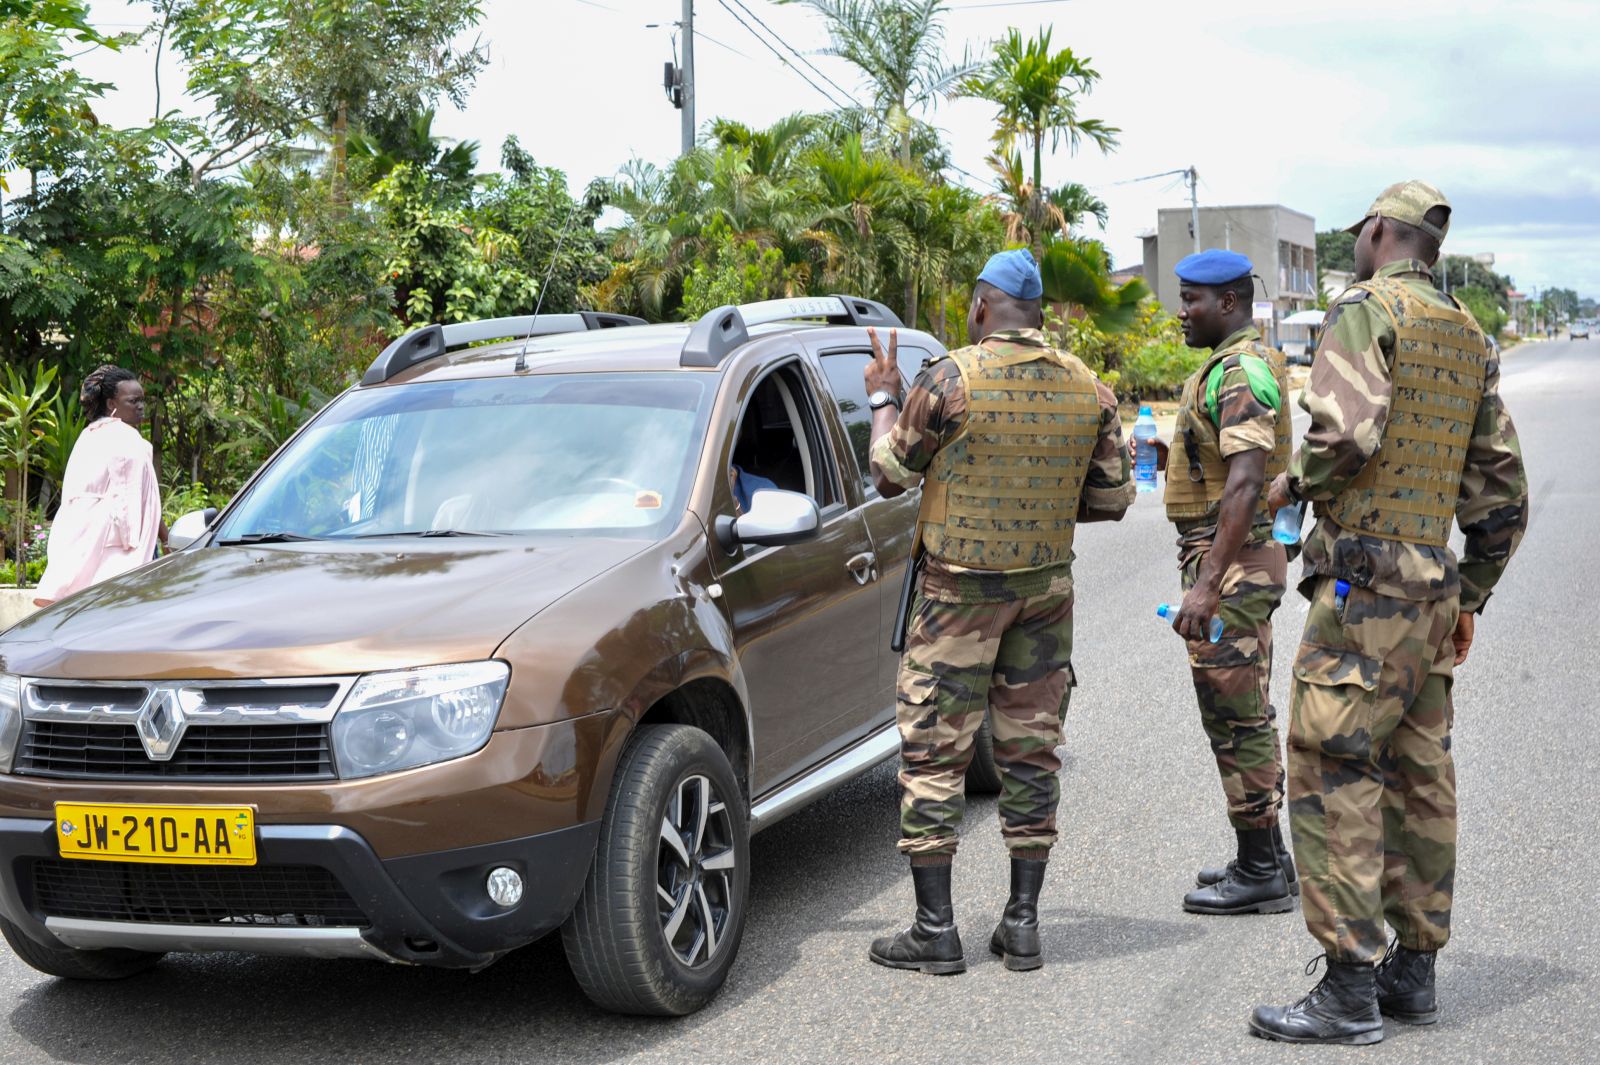 epa10828741 Members of the security forces gesture to a driver, at a checkpoint in the streets of Akanda, Gabon, 30 August 2023. Members of the Gabonese army on 30 August announced on national television that they were canceling the election results and putting an end to Gabonese President Ali Bongo's regime, who had been declared the winner.  EPA/STR